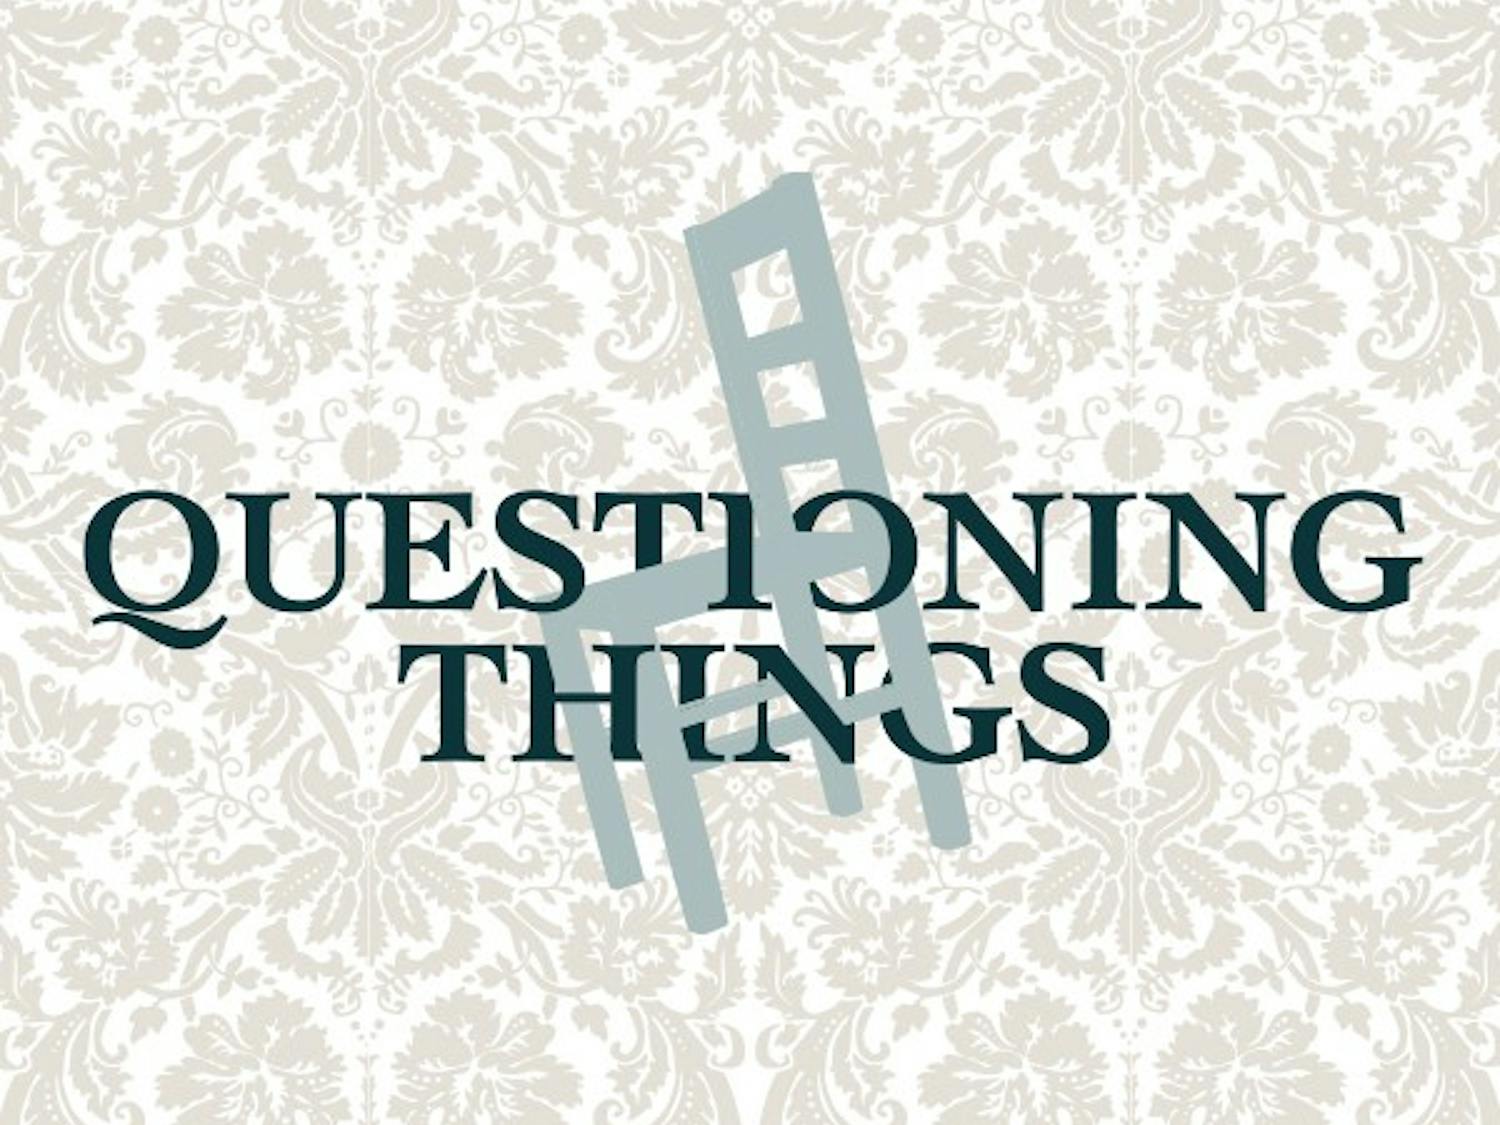 Questioning_Things_square_web-graphic_600x600.jpg